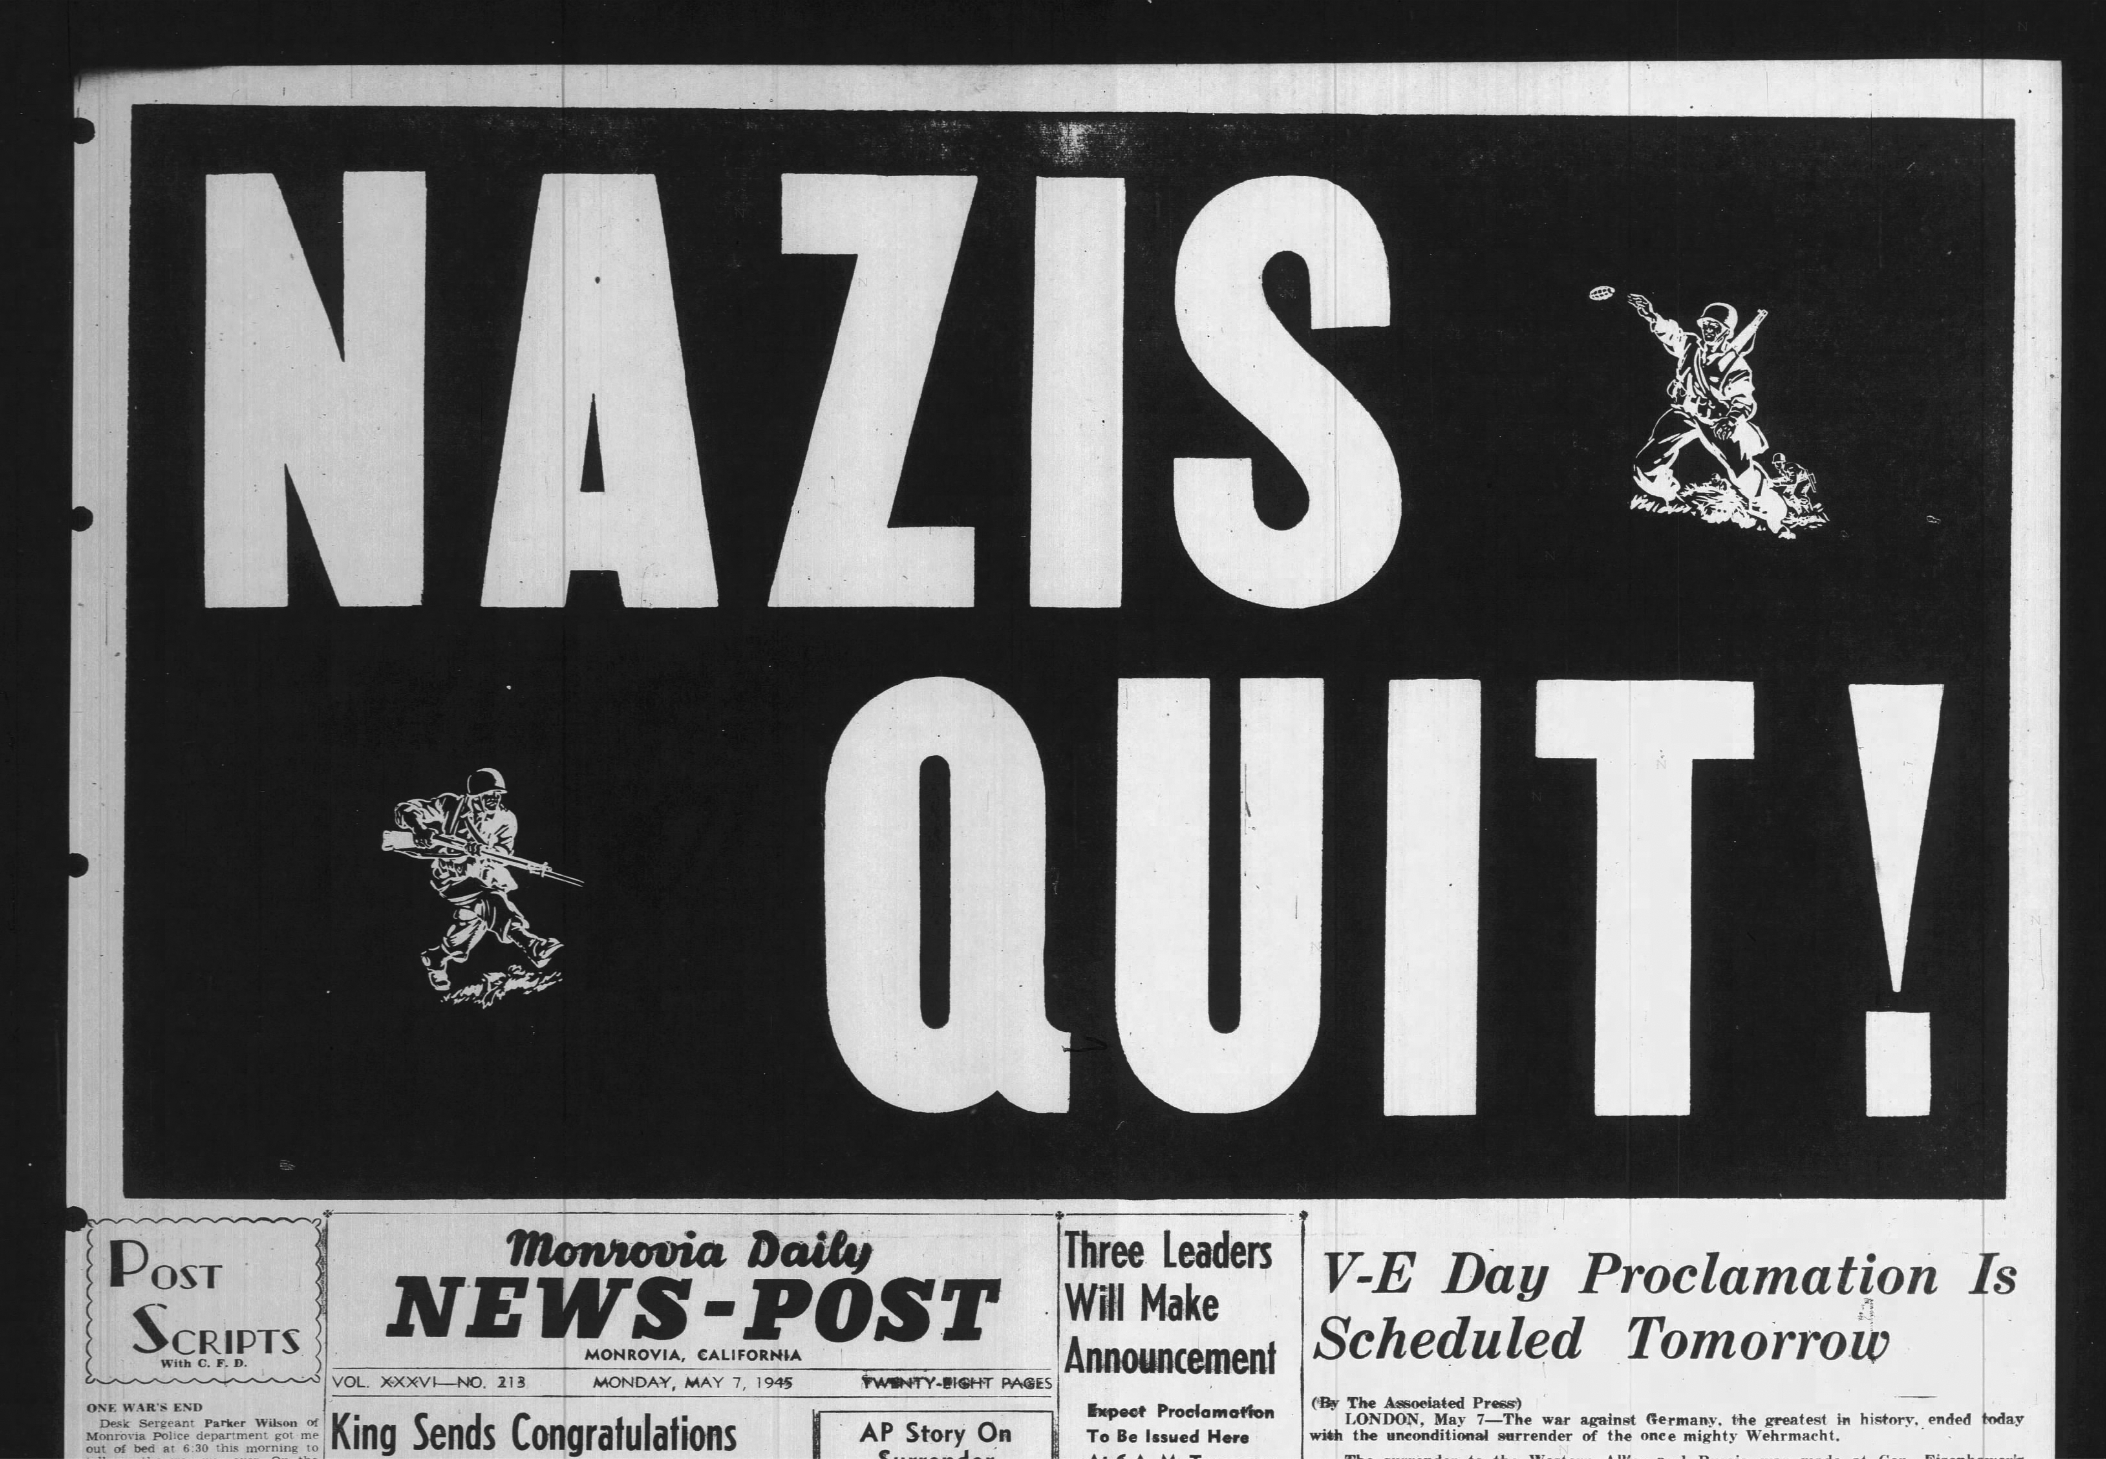 The text, 'Nazis Quit' set in all-caps type that is eight inches tall. It is set against a solid black background that takes up the top two thirds of the front page of the newspaper. The newspaper is the Monrovia Daily News-Post, published on May 7, 1945. Other front page headline news items are 'King sends congratulations', 'AP Story on Surrender', 'Germans Told of Defeat', 'Three Leaders Will Make Announcement', and 'V-E Day Proclamation Is Scheduled Tomorrow'. Each of these headlines is set in a much smaller type size than the Nazis Quit banner.